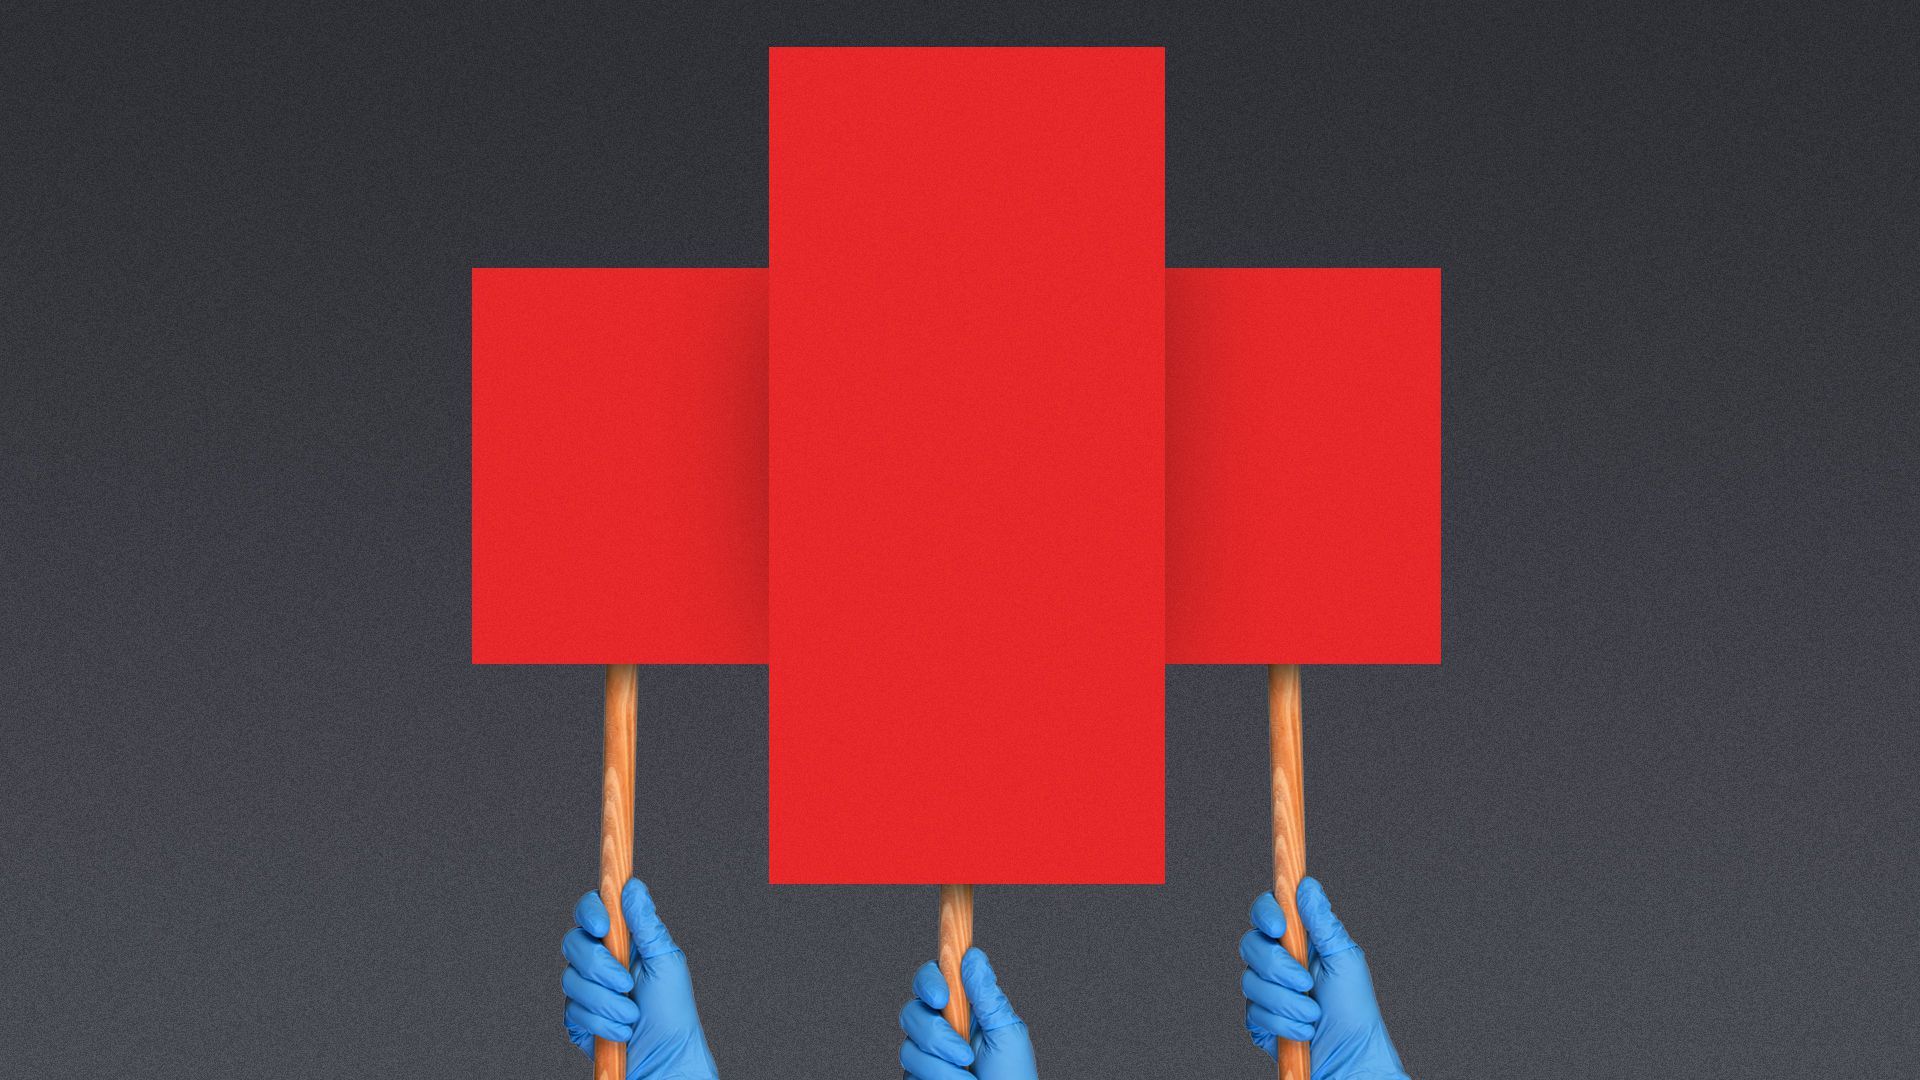 Illustration of hands in medical gloves holding red picket signs, forming a red cross symbol. 